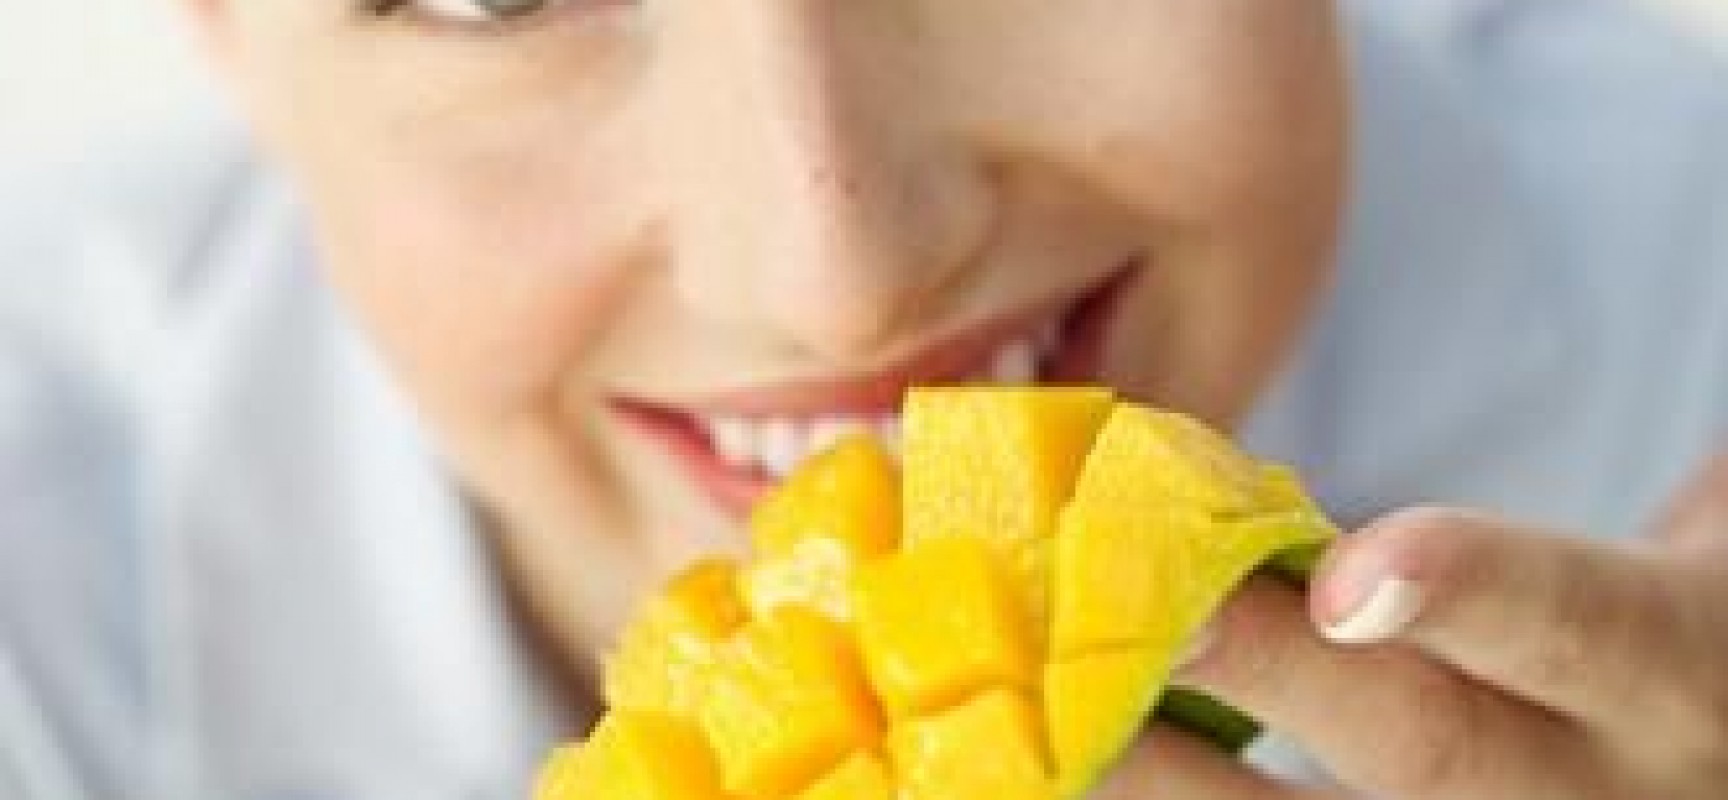 Mangoes: Shout out to all the Mango Maniacs